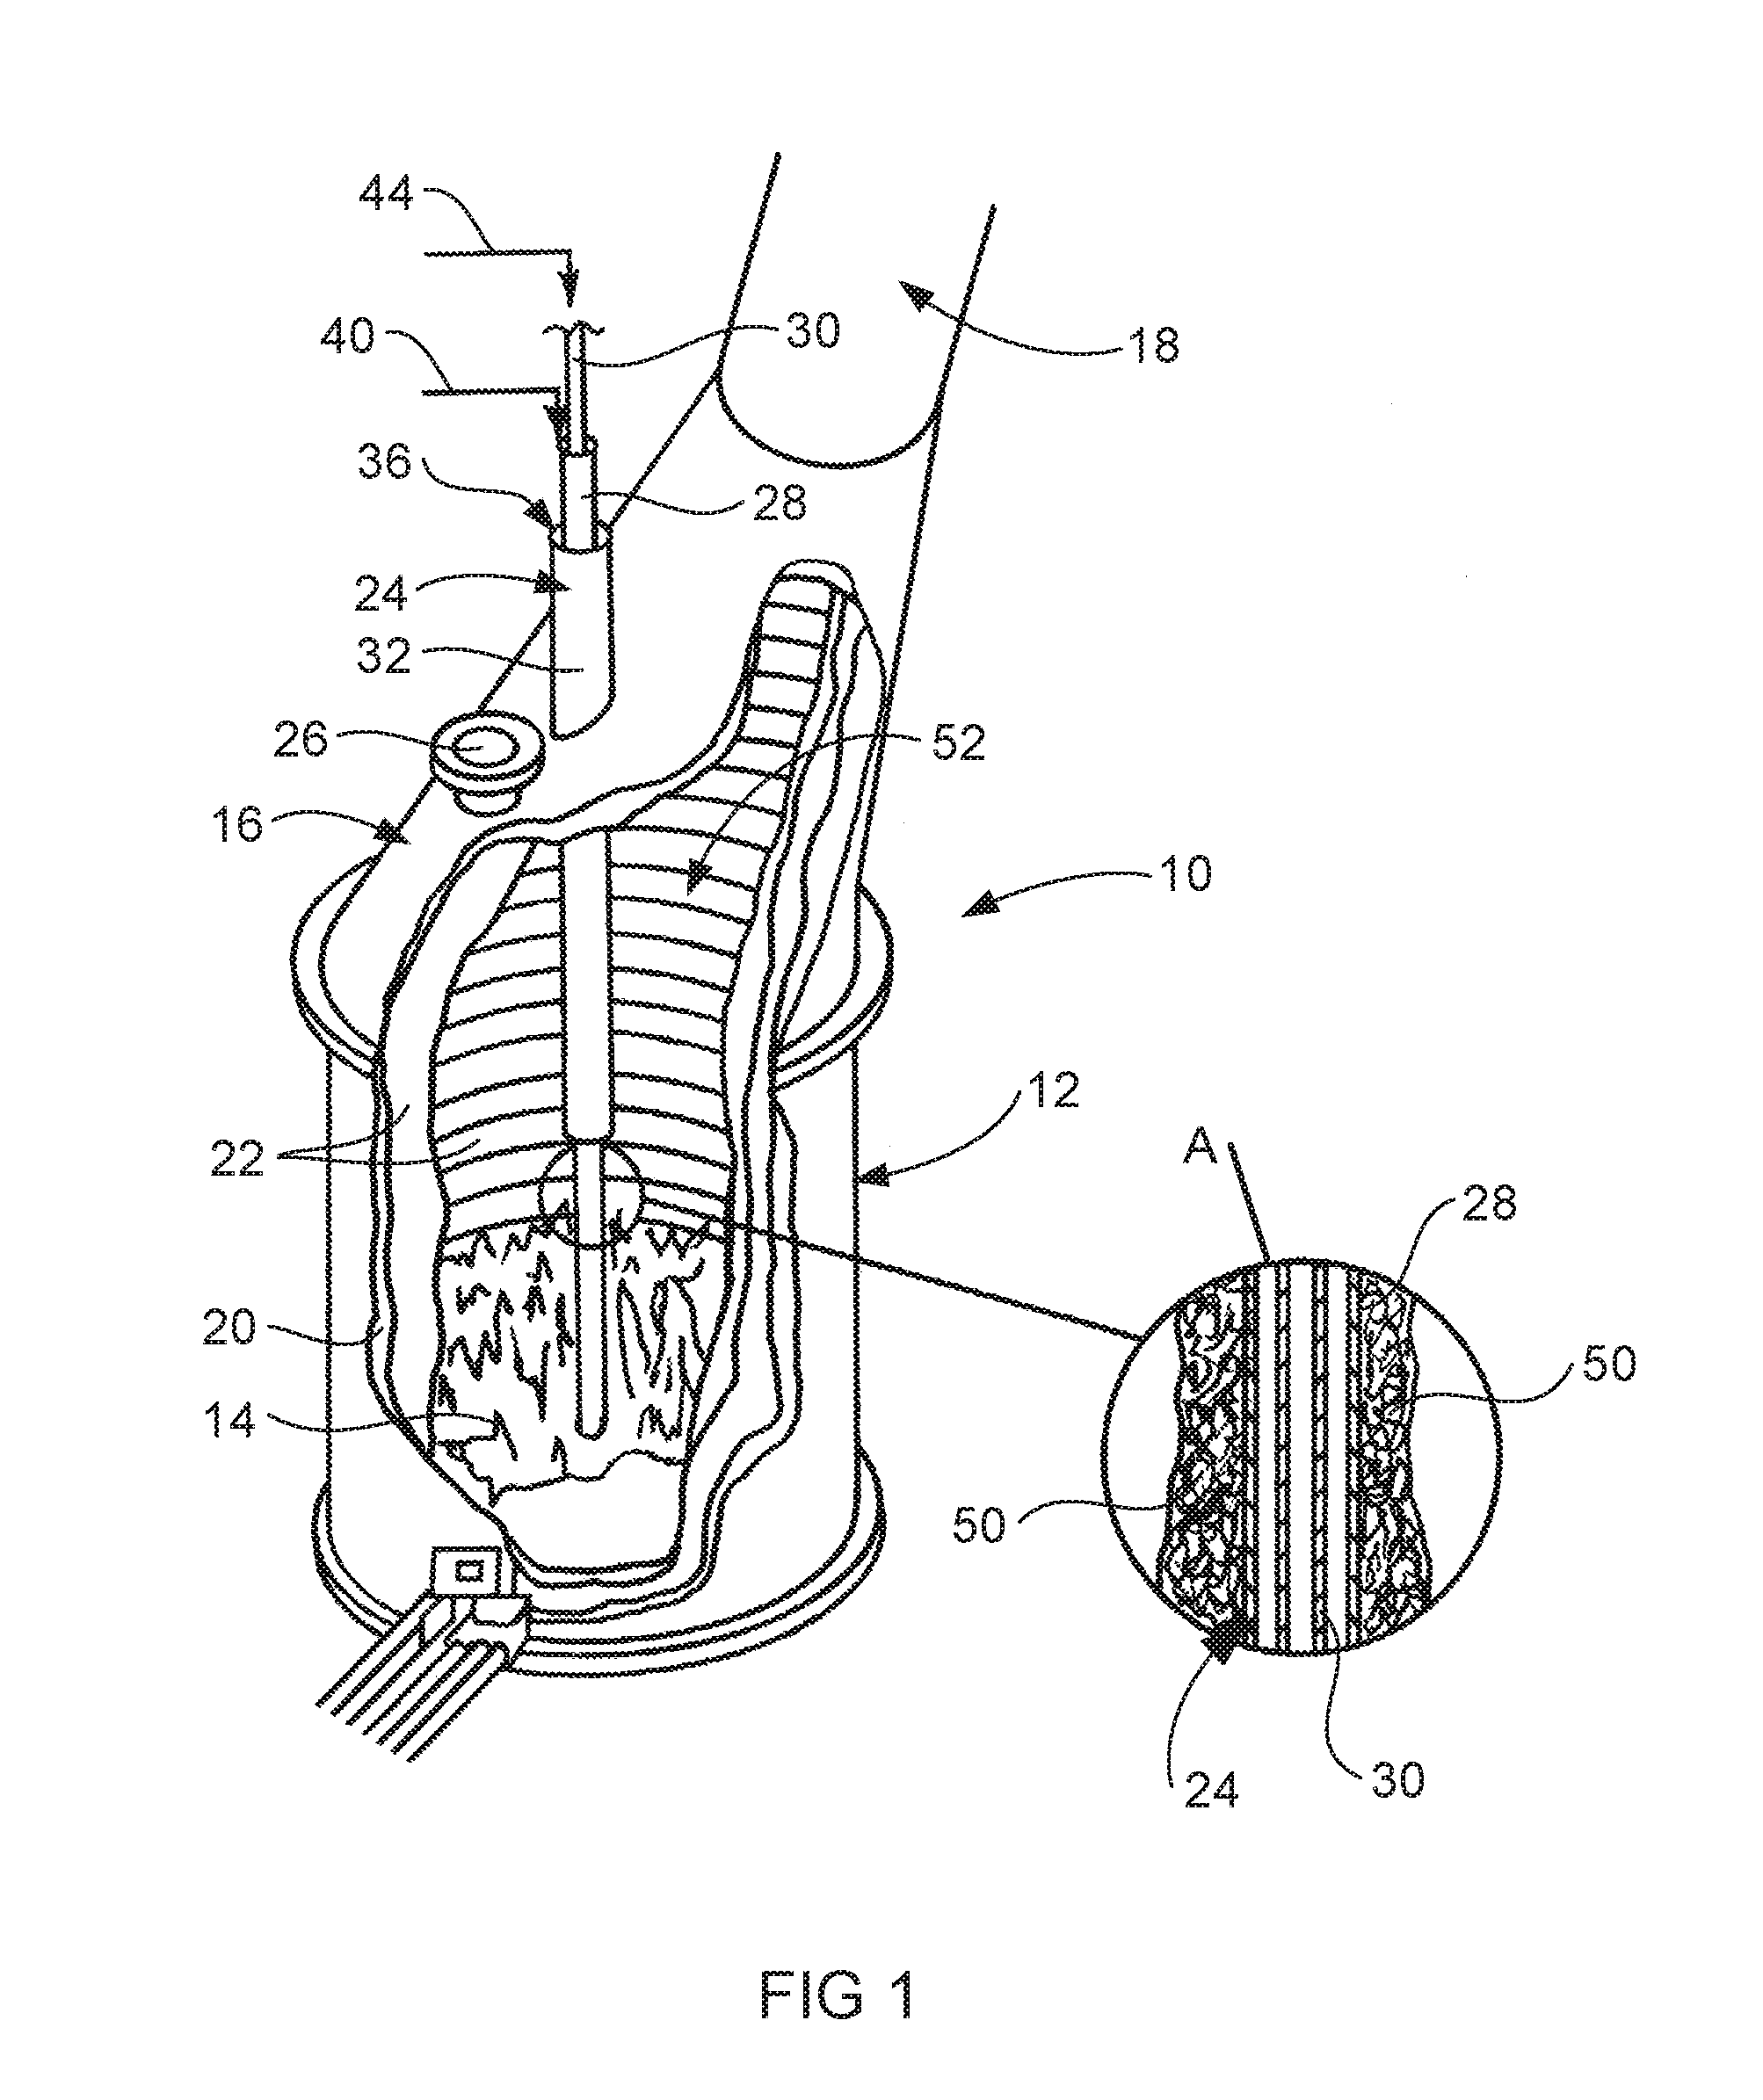 Top submerged injection lance for enhanced submerged combustion